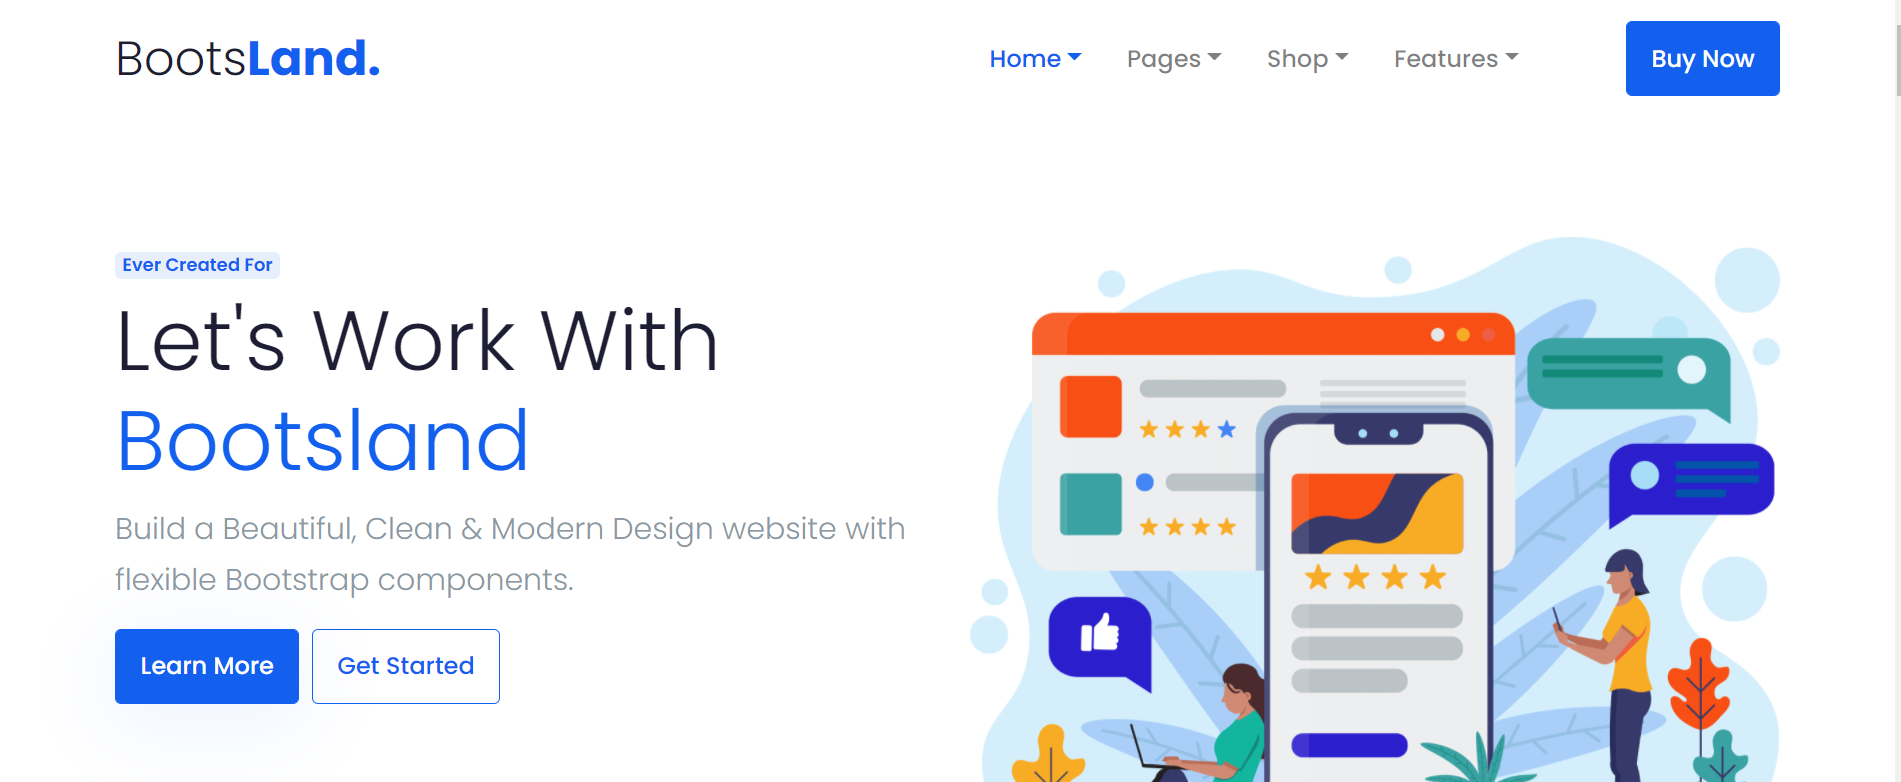 Bootsland-Creative-Bootstrap-4-Landing-Page.png